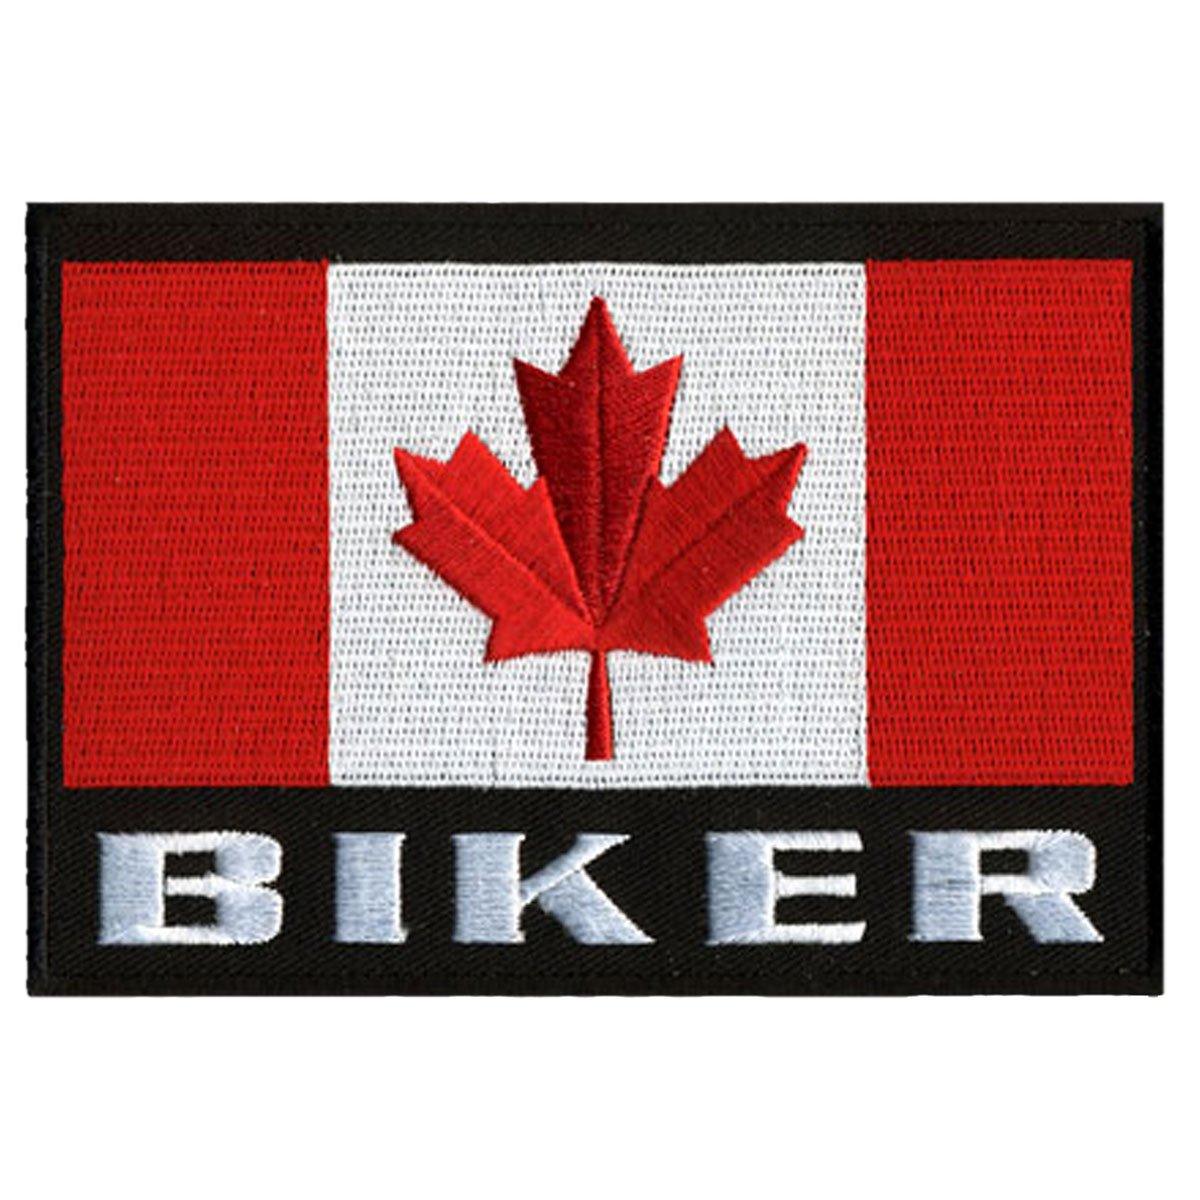 Hot Leathers Canadian Biker Flag 5" X 4" Patch - American Legend Rider